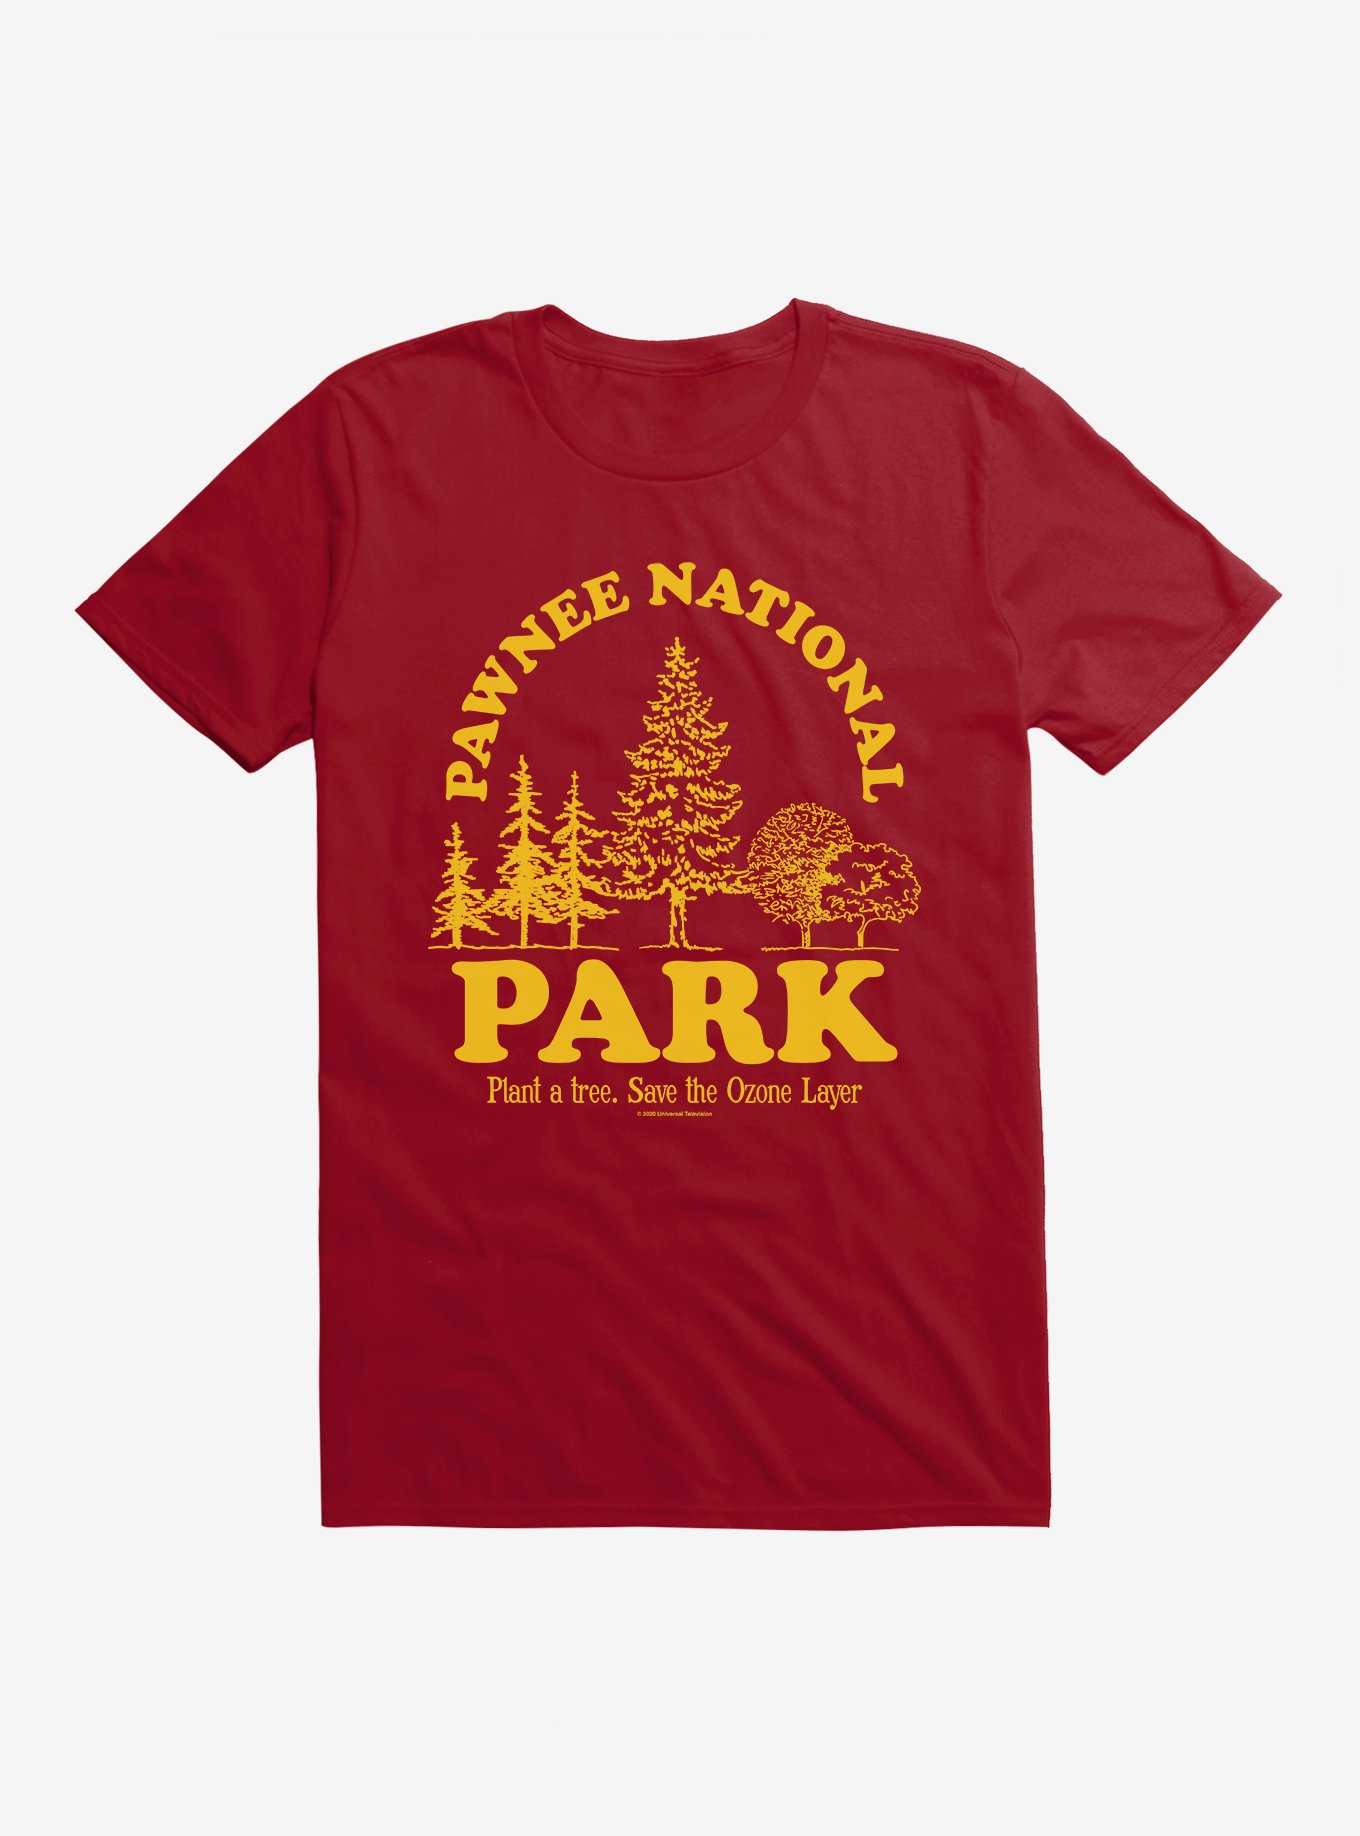 Parks And Recreation Pawnee National Park T-Shirt, , hi-res